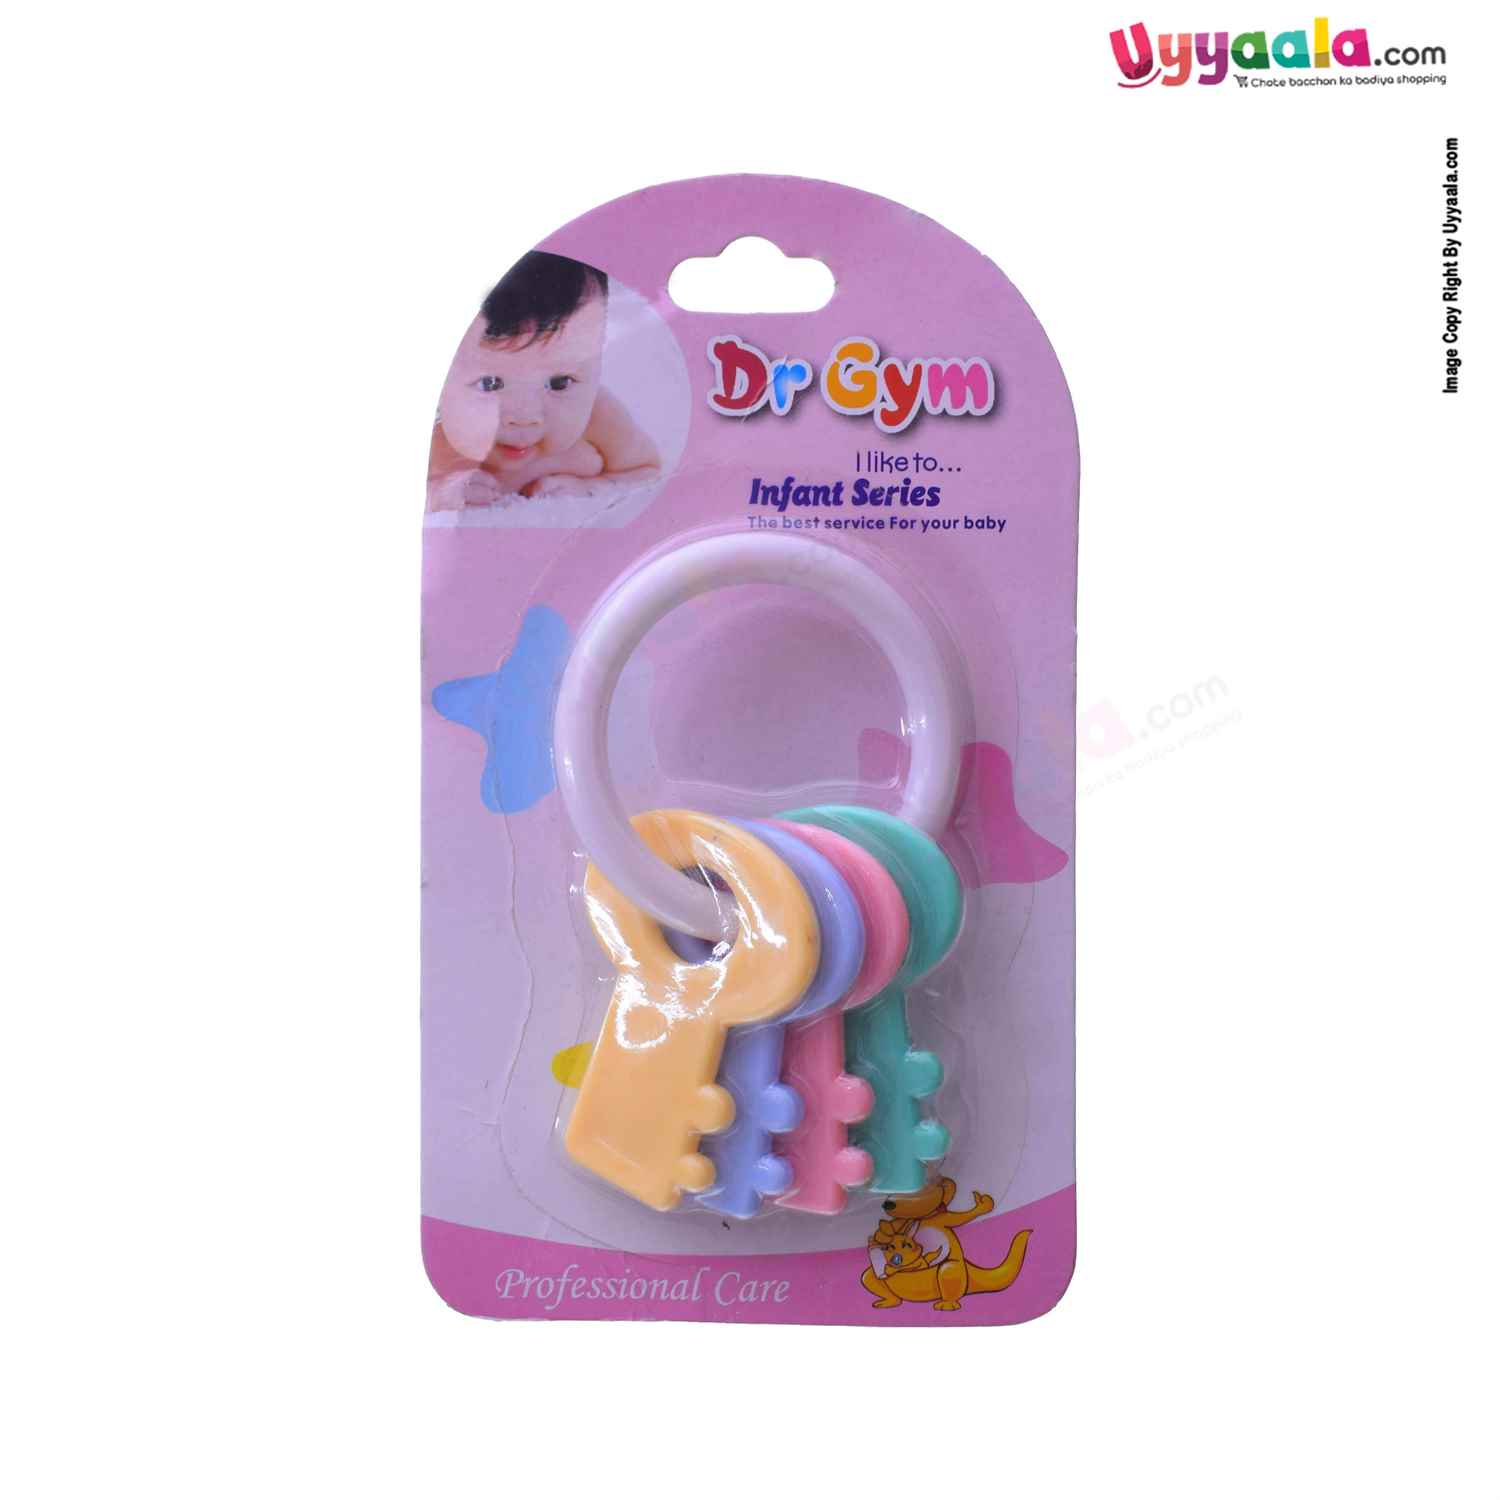 DR.GYM Key Set Type Teether  6+m Age- Multi Color